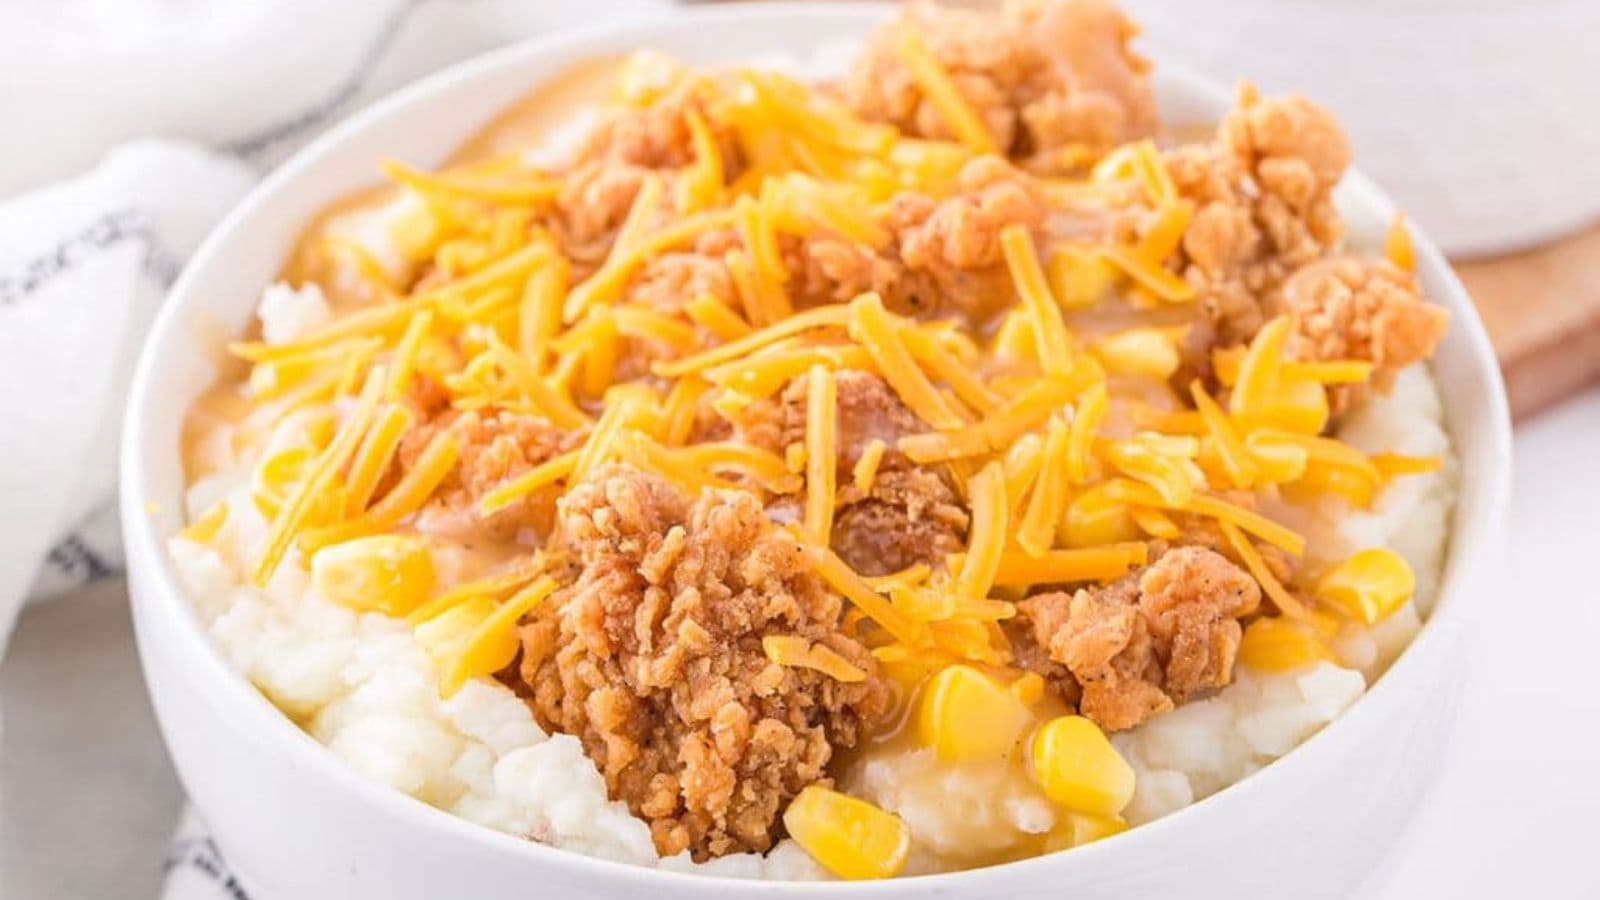 A bowl of mashed potatoes, chicken, corn, and cheese.